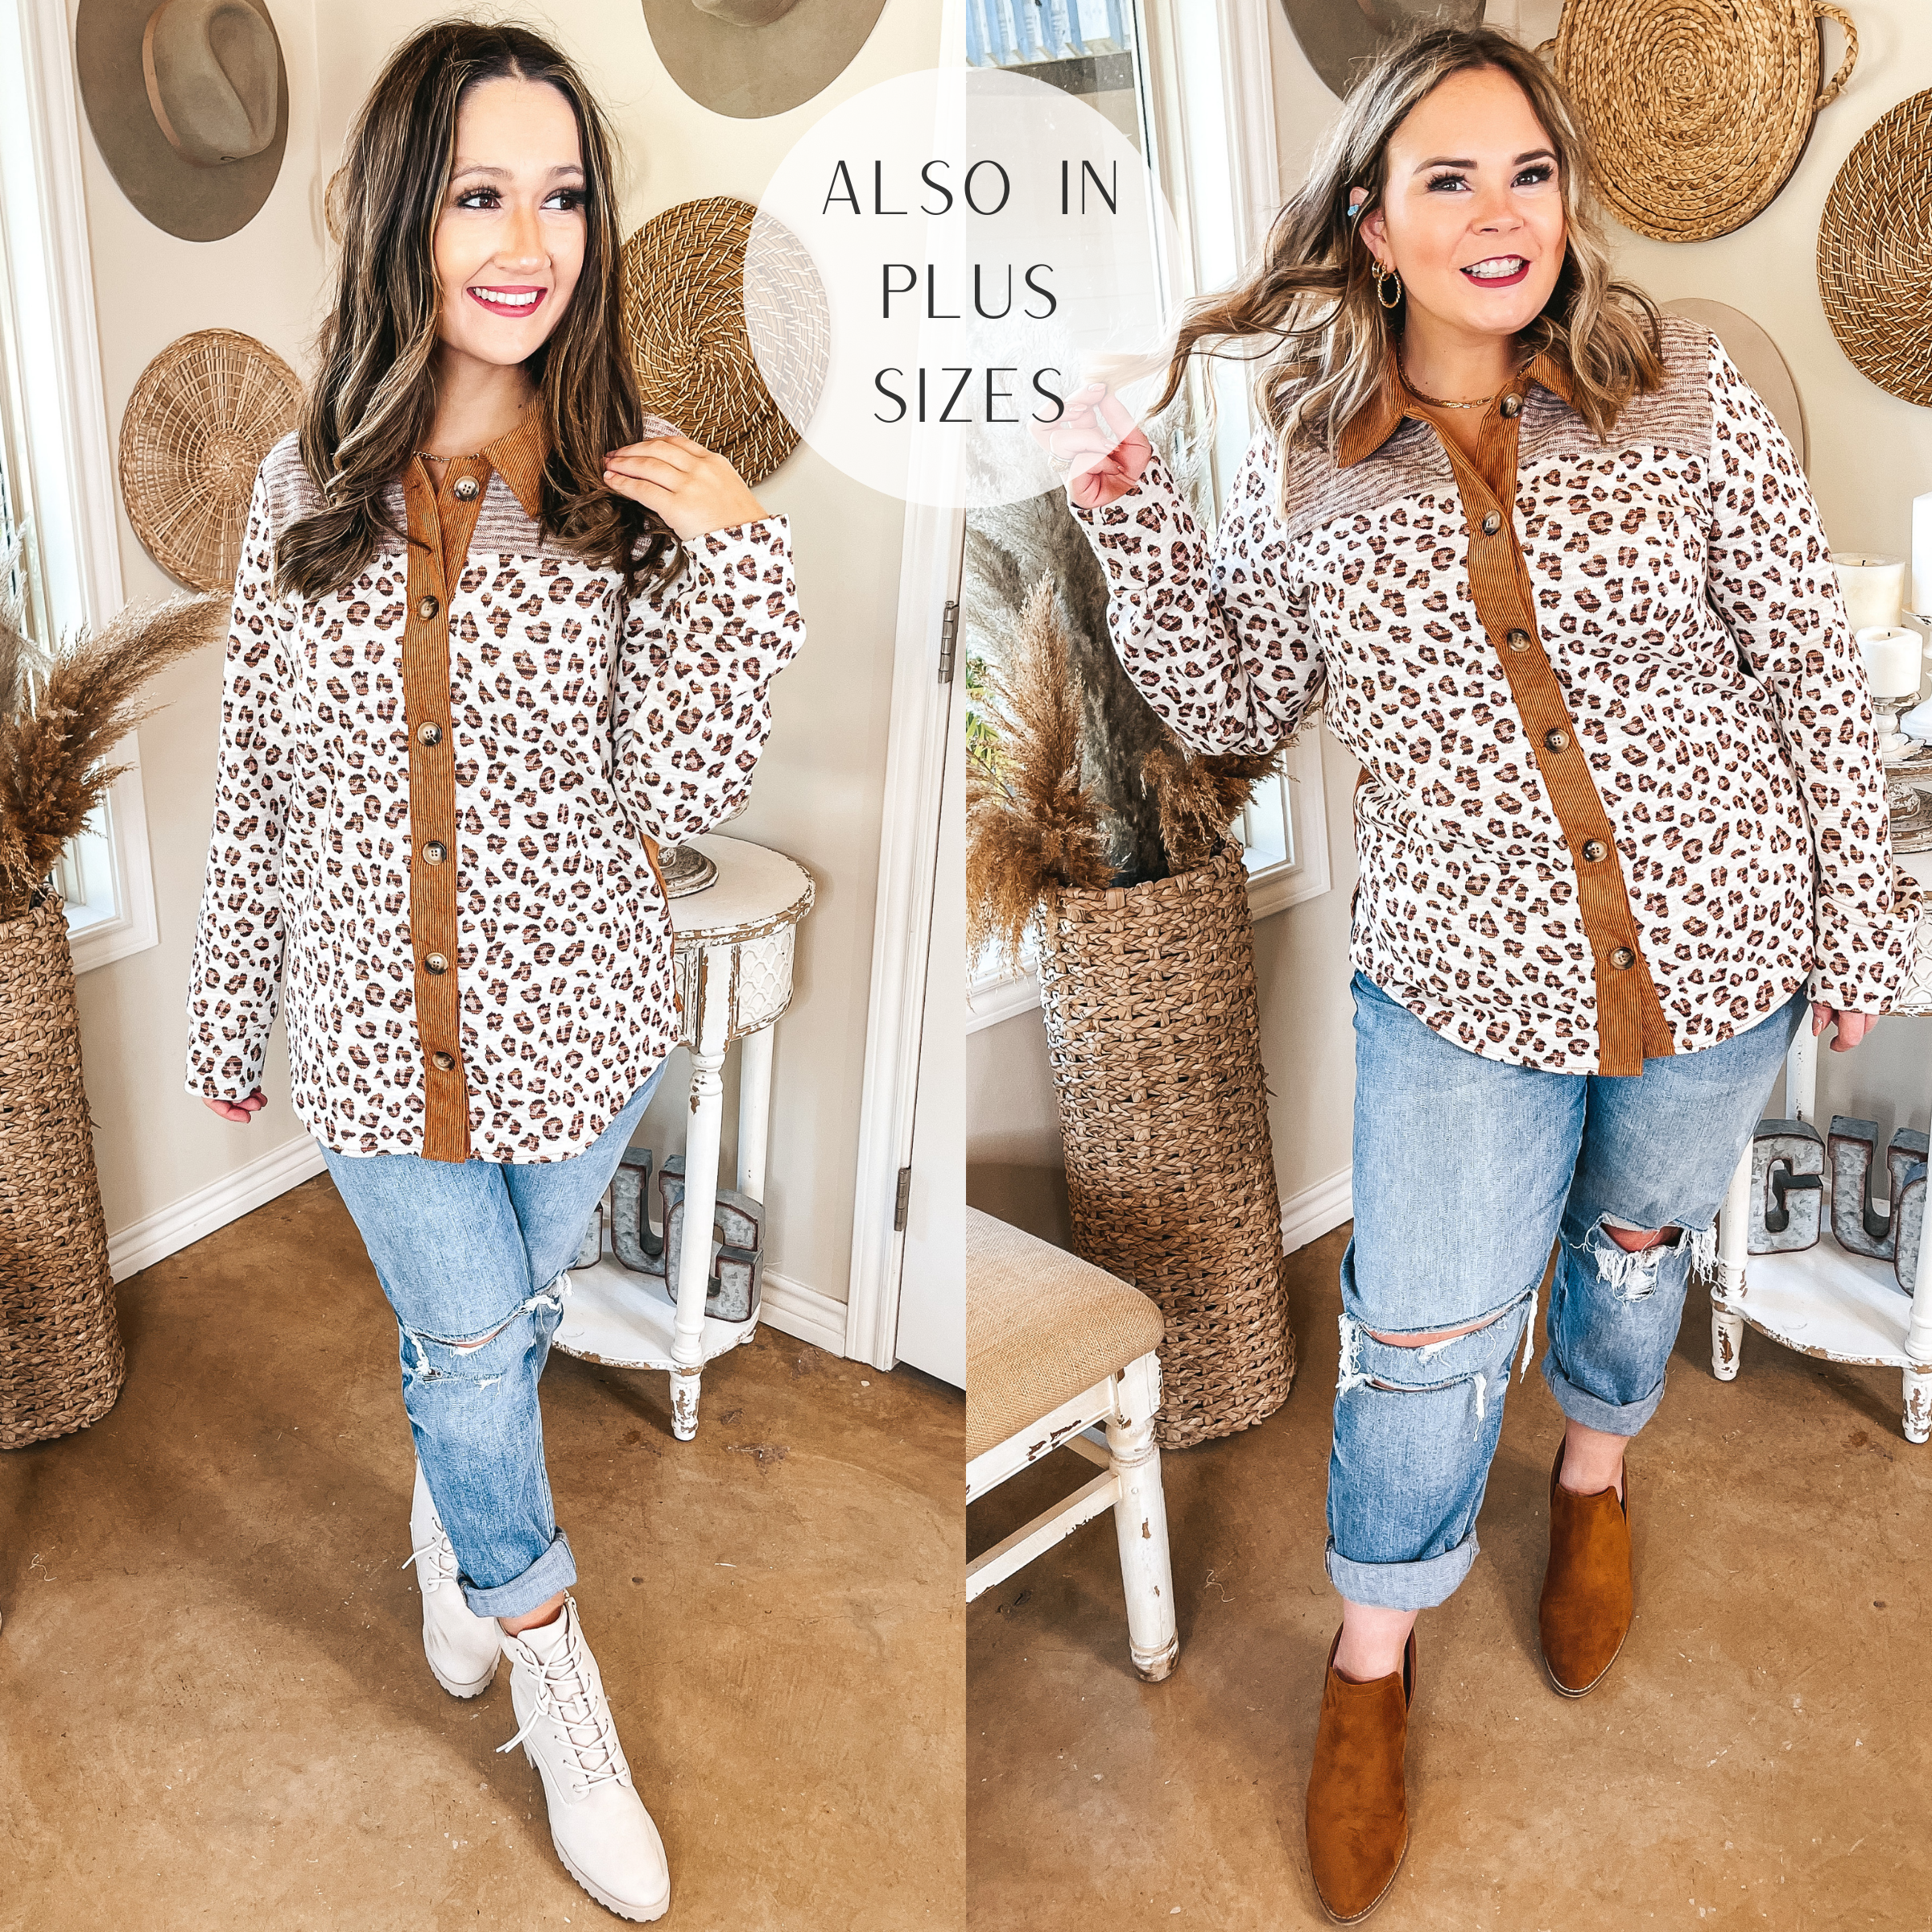 Models are wearing an ivory leopard long sleeve top. Small size model has it paired with boyfriend jeans and lace up booties. Large size model has it paired with brown booties and boyfriend jeans.